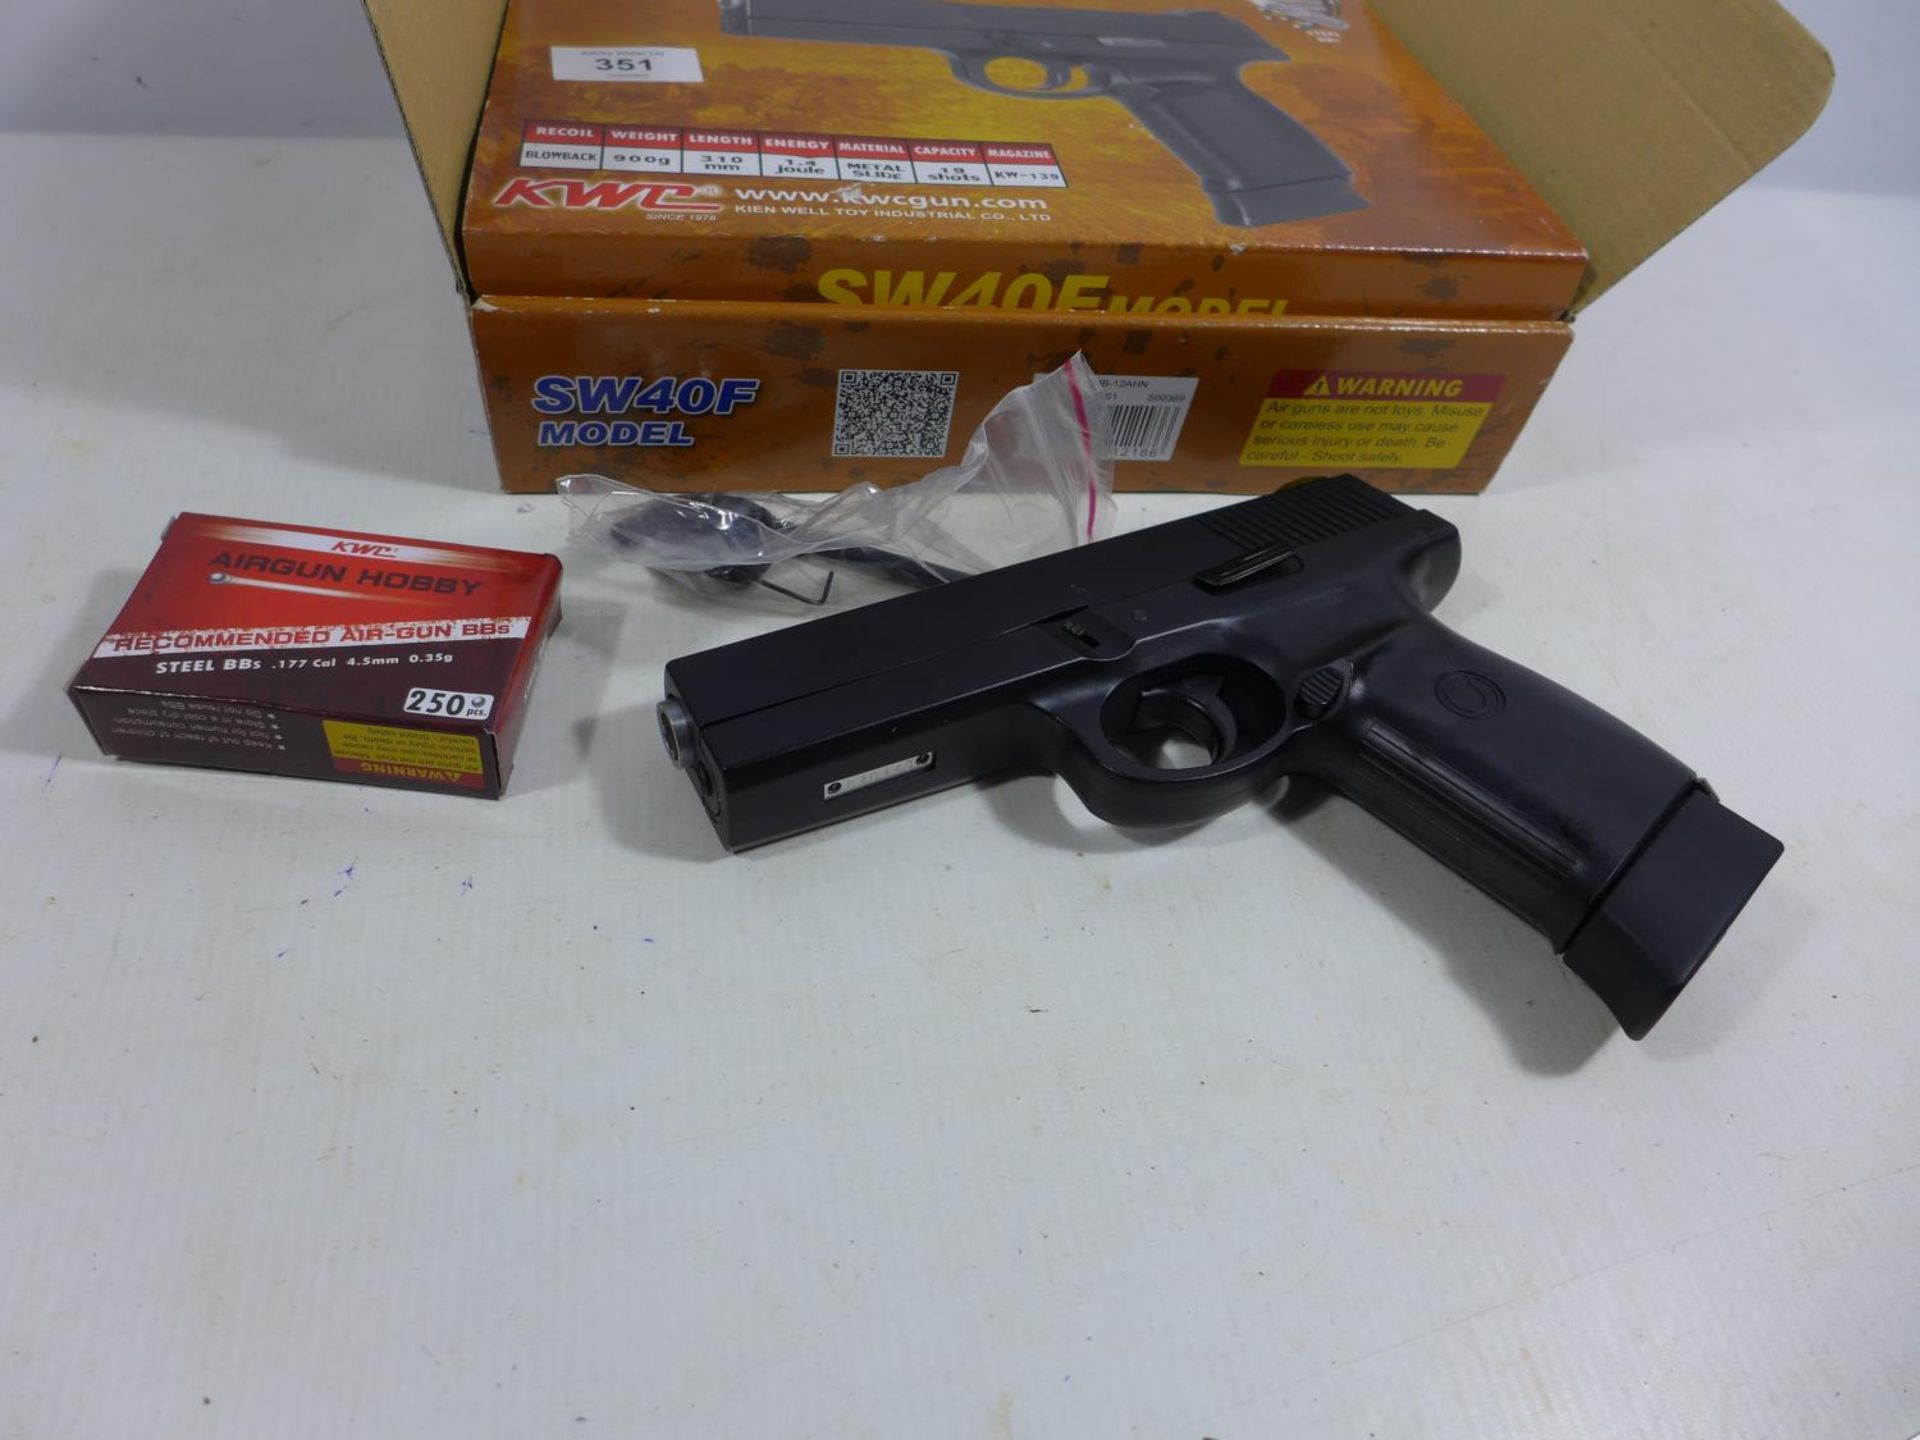 A BOXED AS NEW SW40F MODEL CO2 .177 CALIBRE AIR PISTOL, 11CM BARREL, LENGTH 19.5CM, COMPLETE WITH - Image 3 of 6